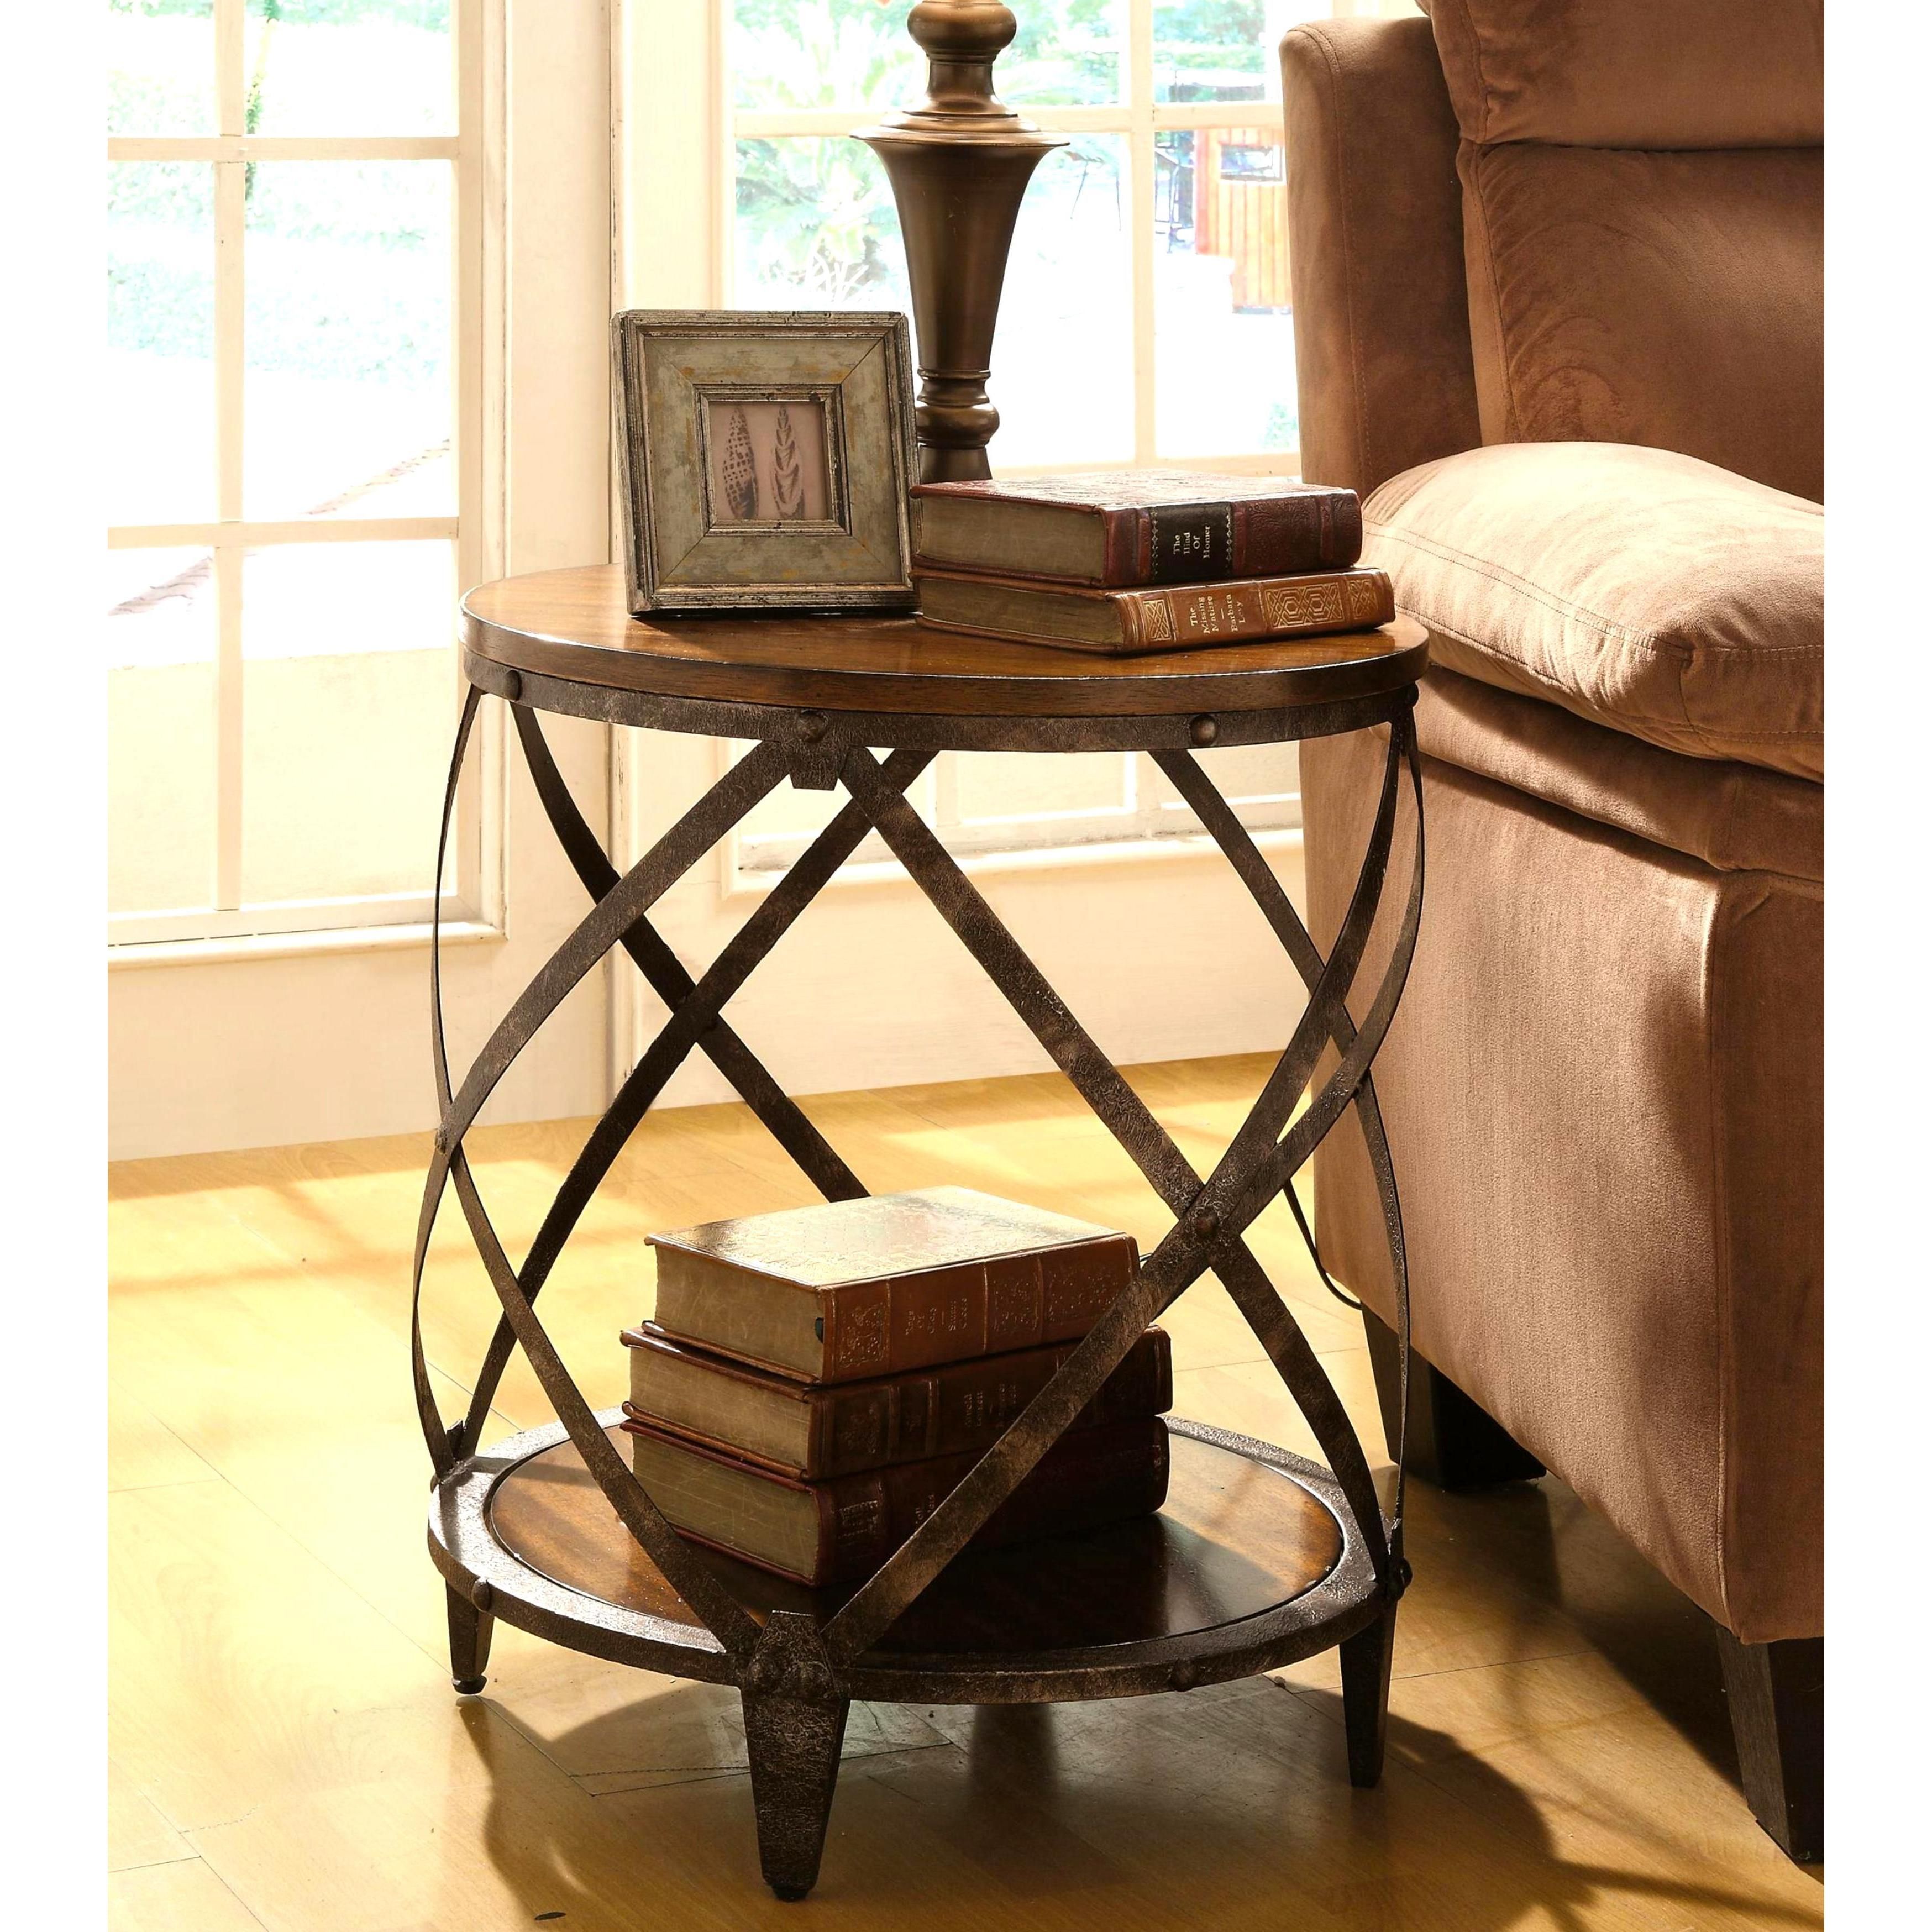 give your home contemporary and industrial appeal with this accent metal drum table constructed distressed frame shape features chest cabinet living room cupboard patterned